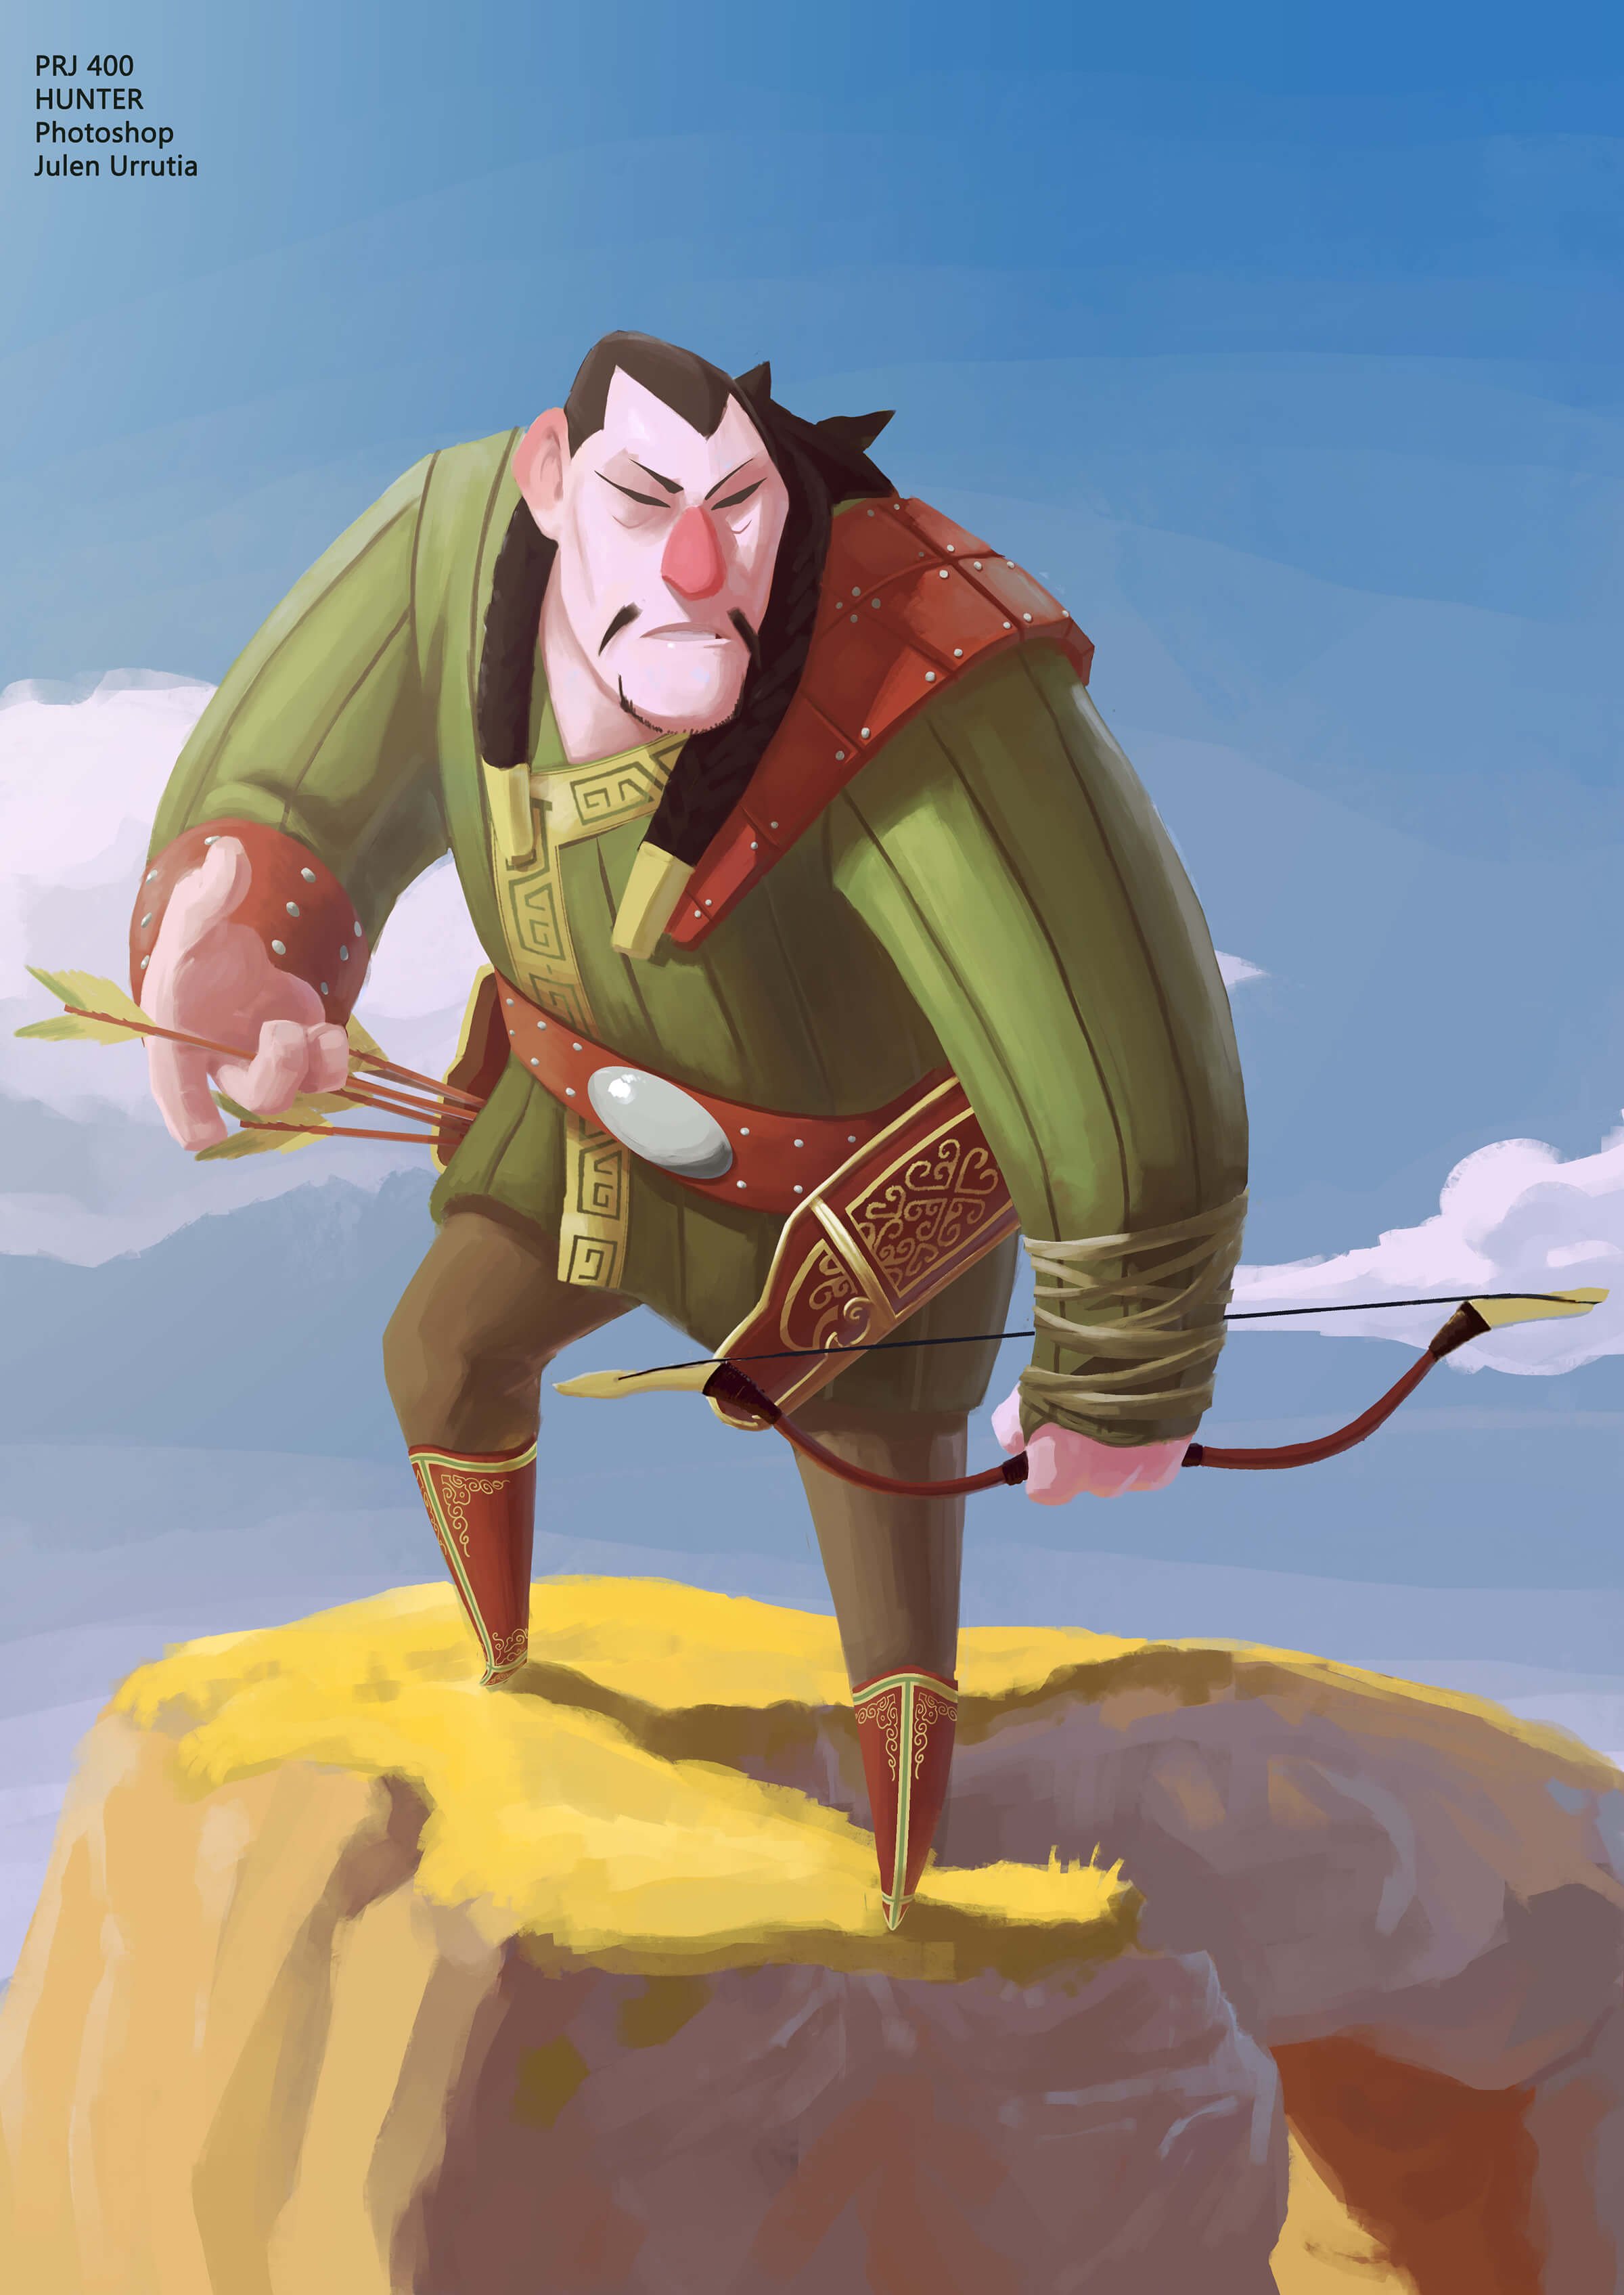 A hulking hunter in traditional dress stands atop a rock looking down as he draws an arrow to shoot with his bow.